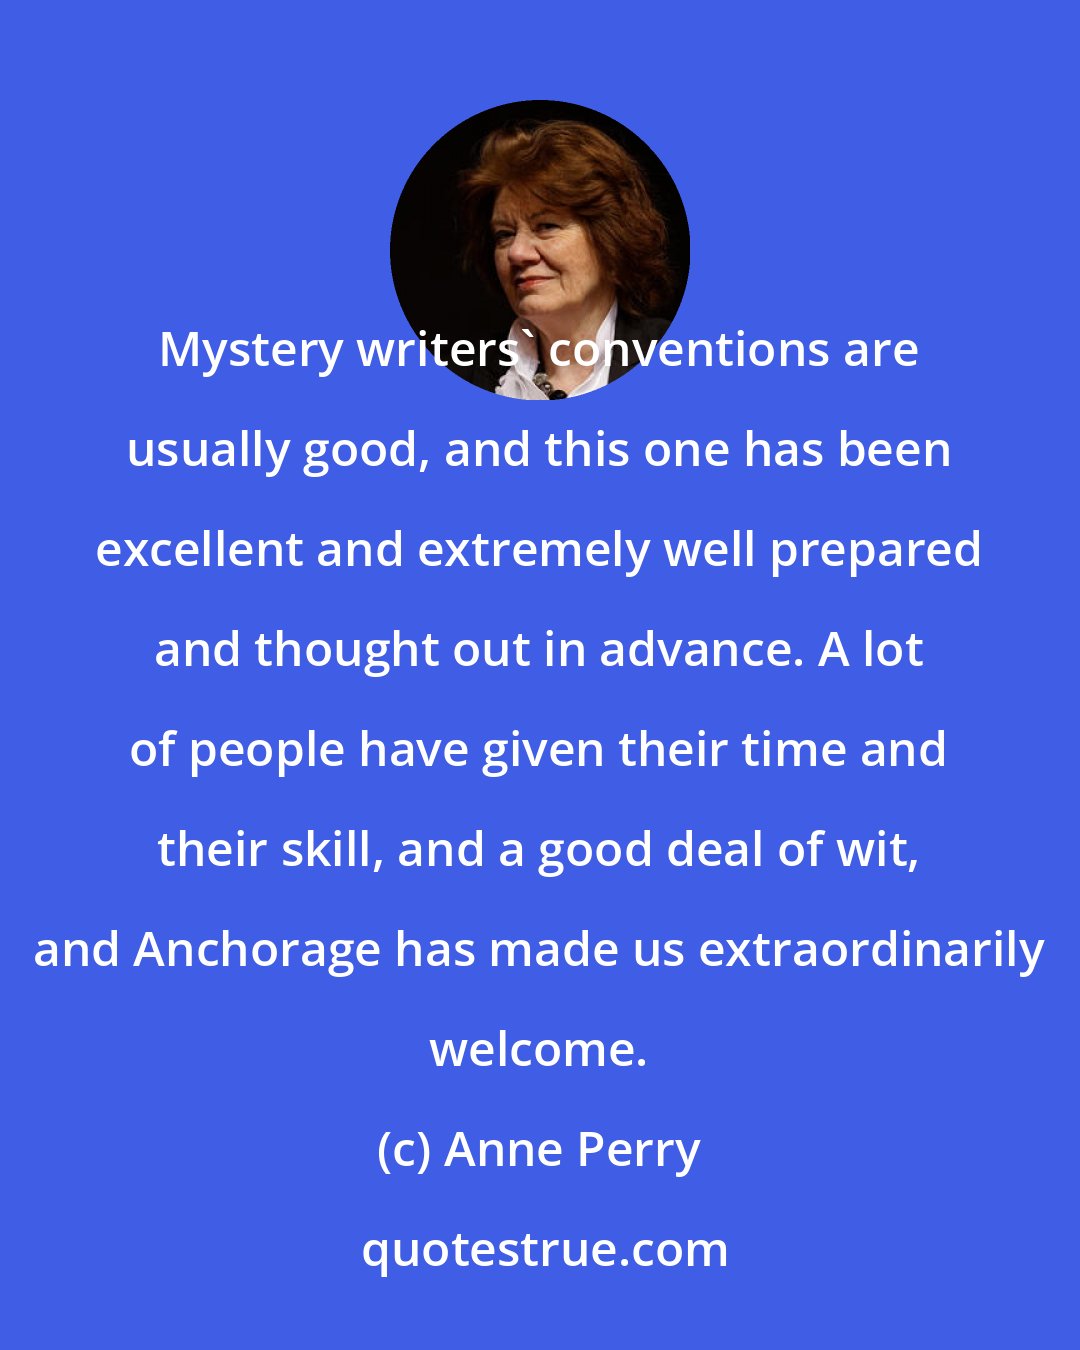 Anne Perry: Mystery writers' conventions are usually good, and this one has been excellent and extremely well prepared and thought out in advance. A lot of people have given their time and their skill, and a good deal of wit, and Anchorage has made us extraordinarily welcome.